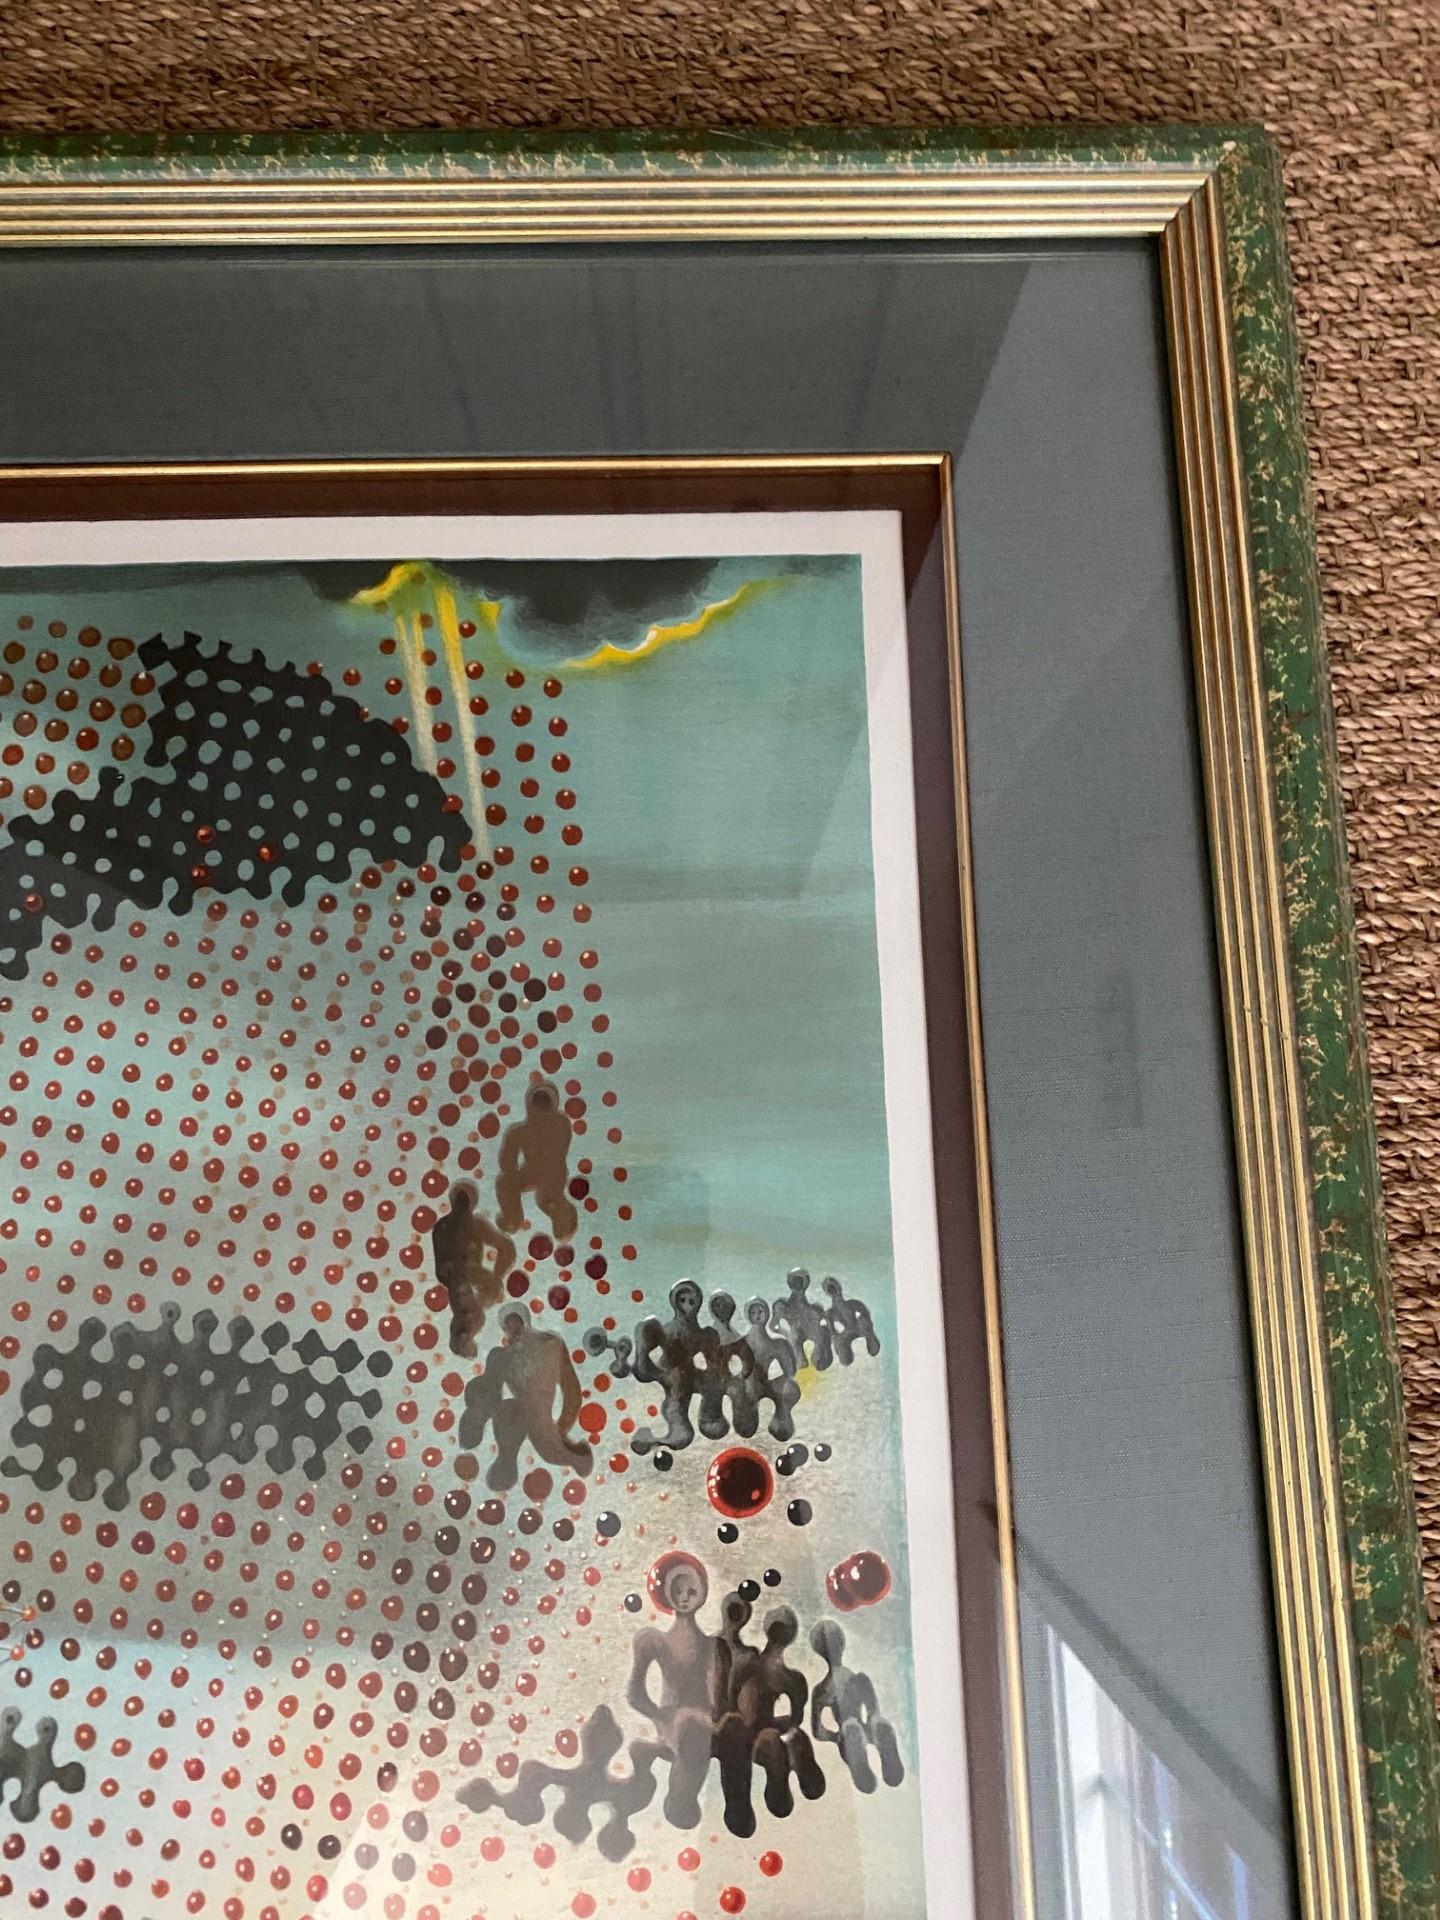 Pressed Vintage European Lithograph “Portrait of my Dead Brother” by Salvador Dali For Sale